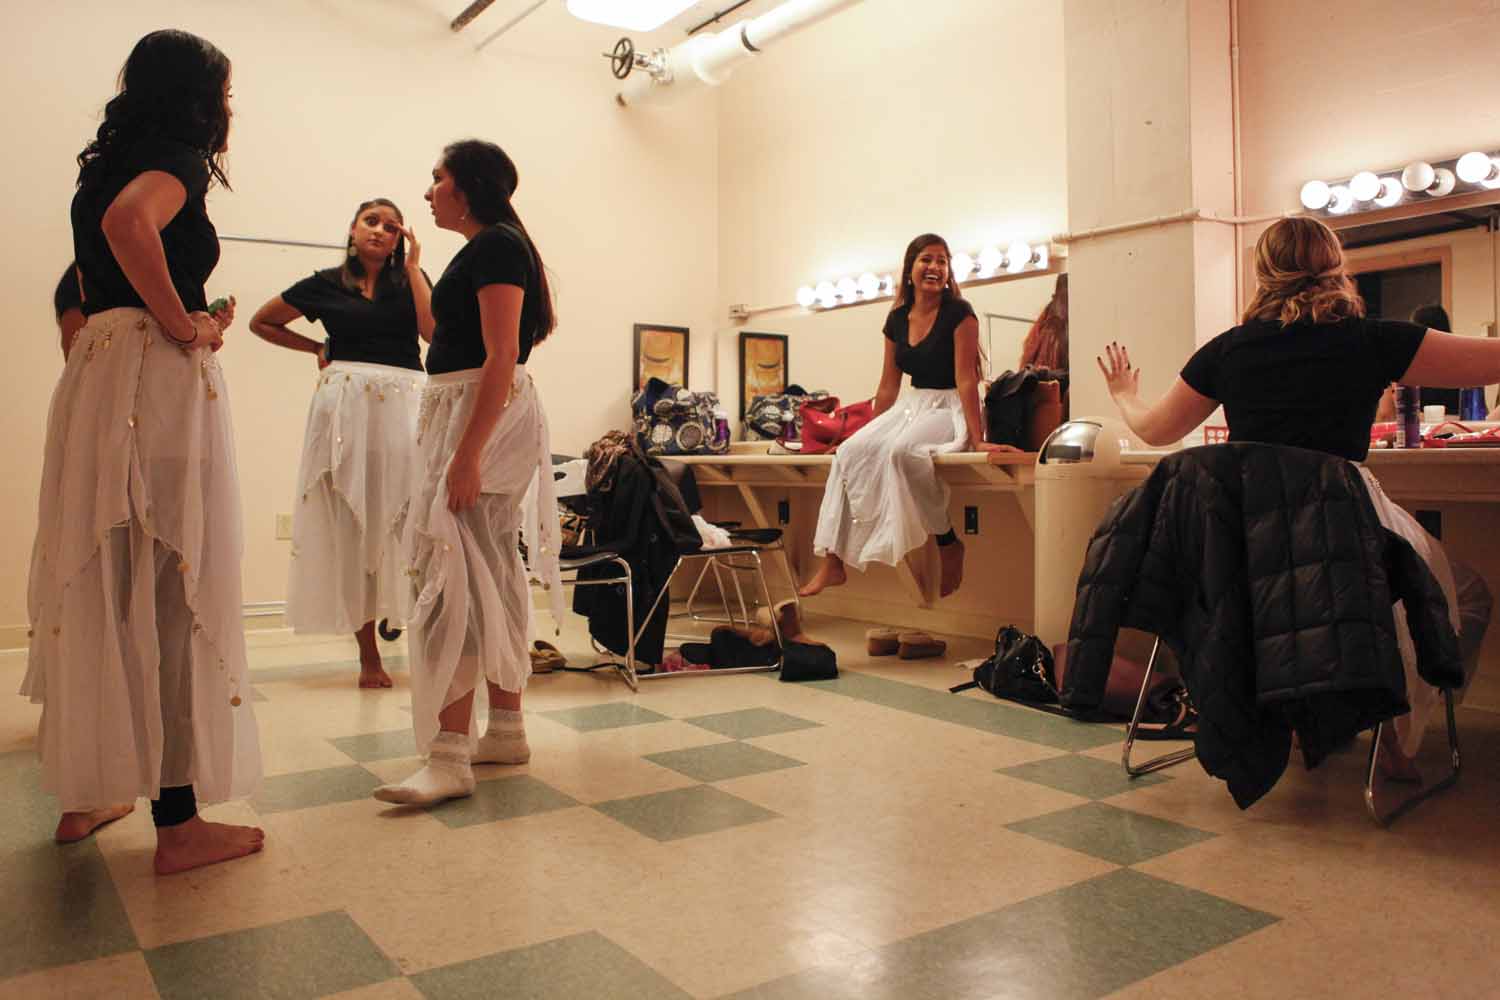 Members of Mizzou Masti converse with each other in the dressing room prior to their performance in India Nite at Jesse Hall.